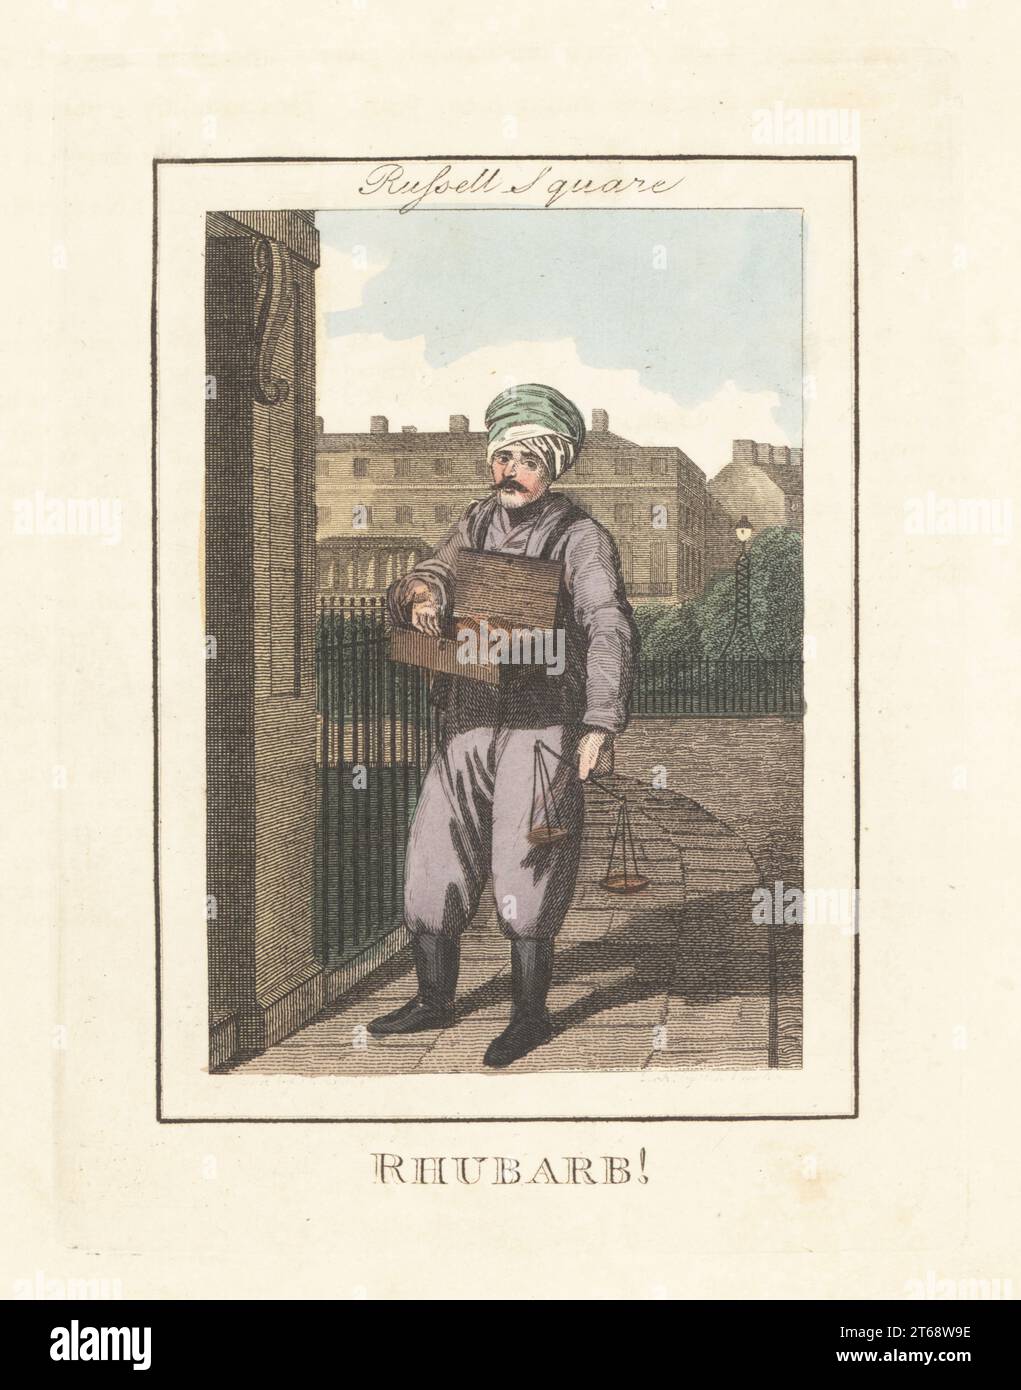 Turkish rhubarb seller on Russell Square. Turk in turban, jacket, harem pants and boots, holding scales and a box of medicinal rhubarb powder. In front of the railings around the garden in the new Russell Square. Handcoloured copperplate engraving by Edward Edwards after an illustration by William Marshall Craig from Description of the Plates Representing the Itinerant Traders of London, Richard Phillips, No. 71 St Pauls Churchyard, London, 1805. Stock Photo